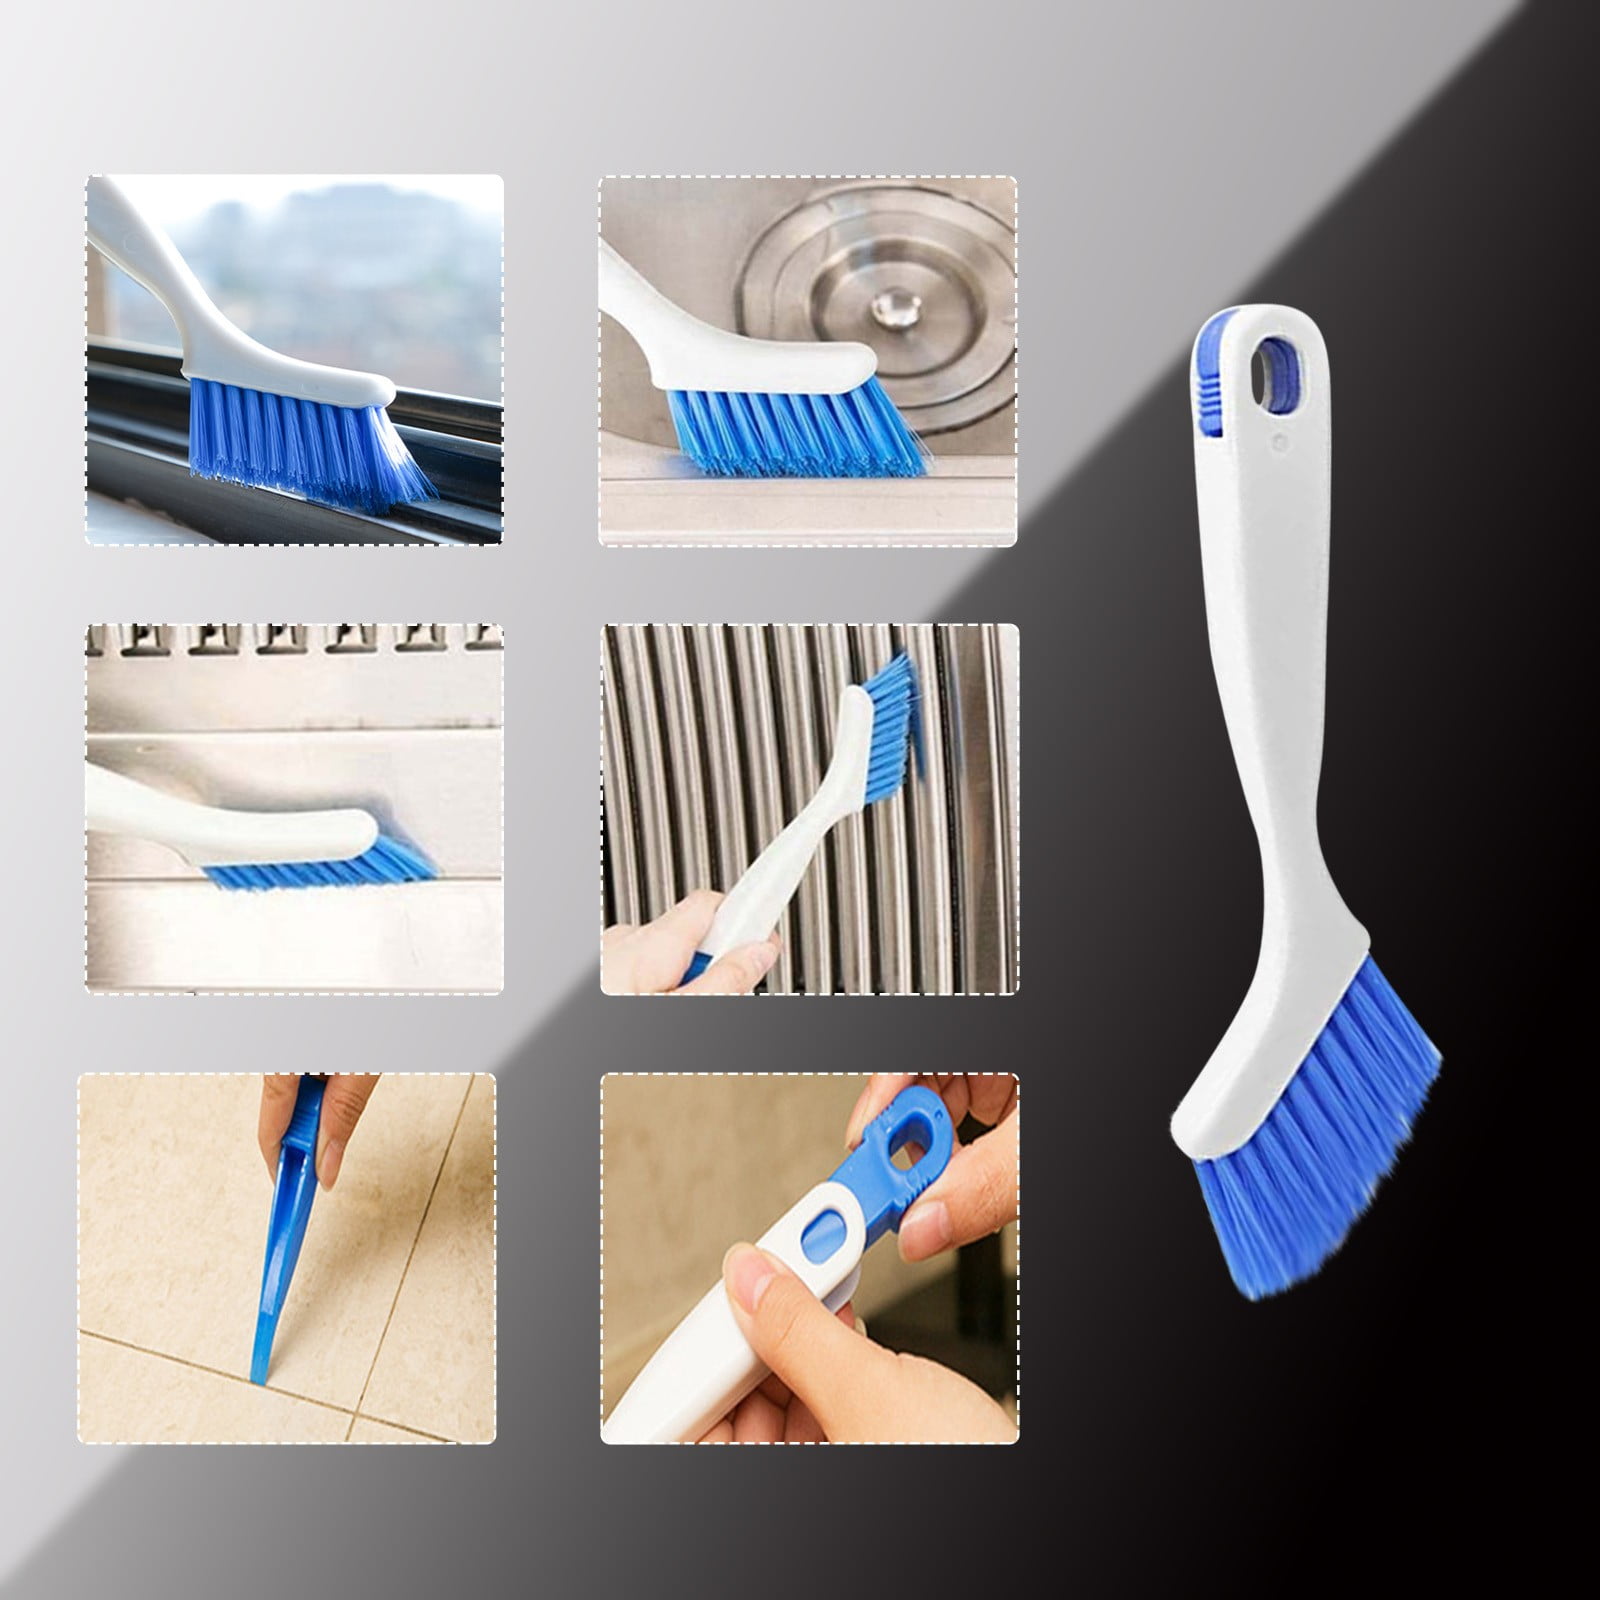 4 Pieces Cleaning Brush Small Scrub Brush for Cleaning Bottle Sink Kitchen  Brush, Edge Corner Grout Bathroom Cleaning Brushes, Sliding Door or Window